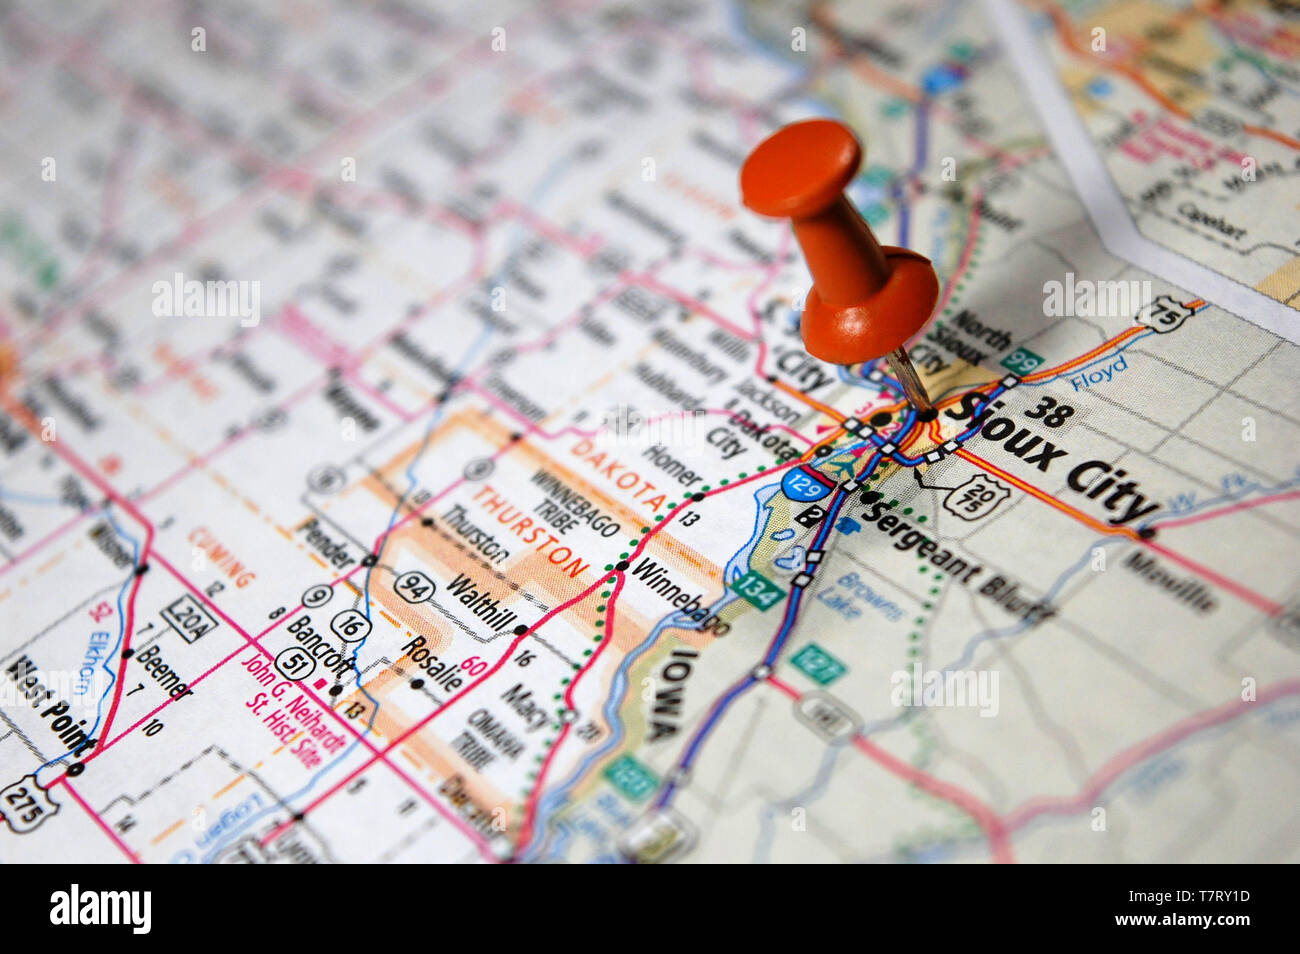 A map of Sioux City, Nebraska marked with a push pin. Stock Photo